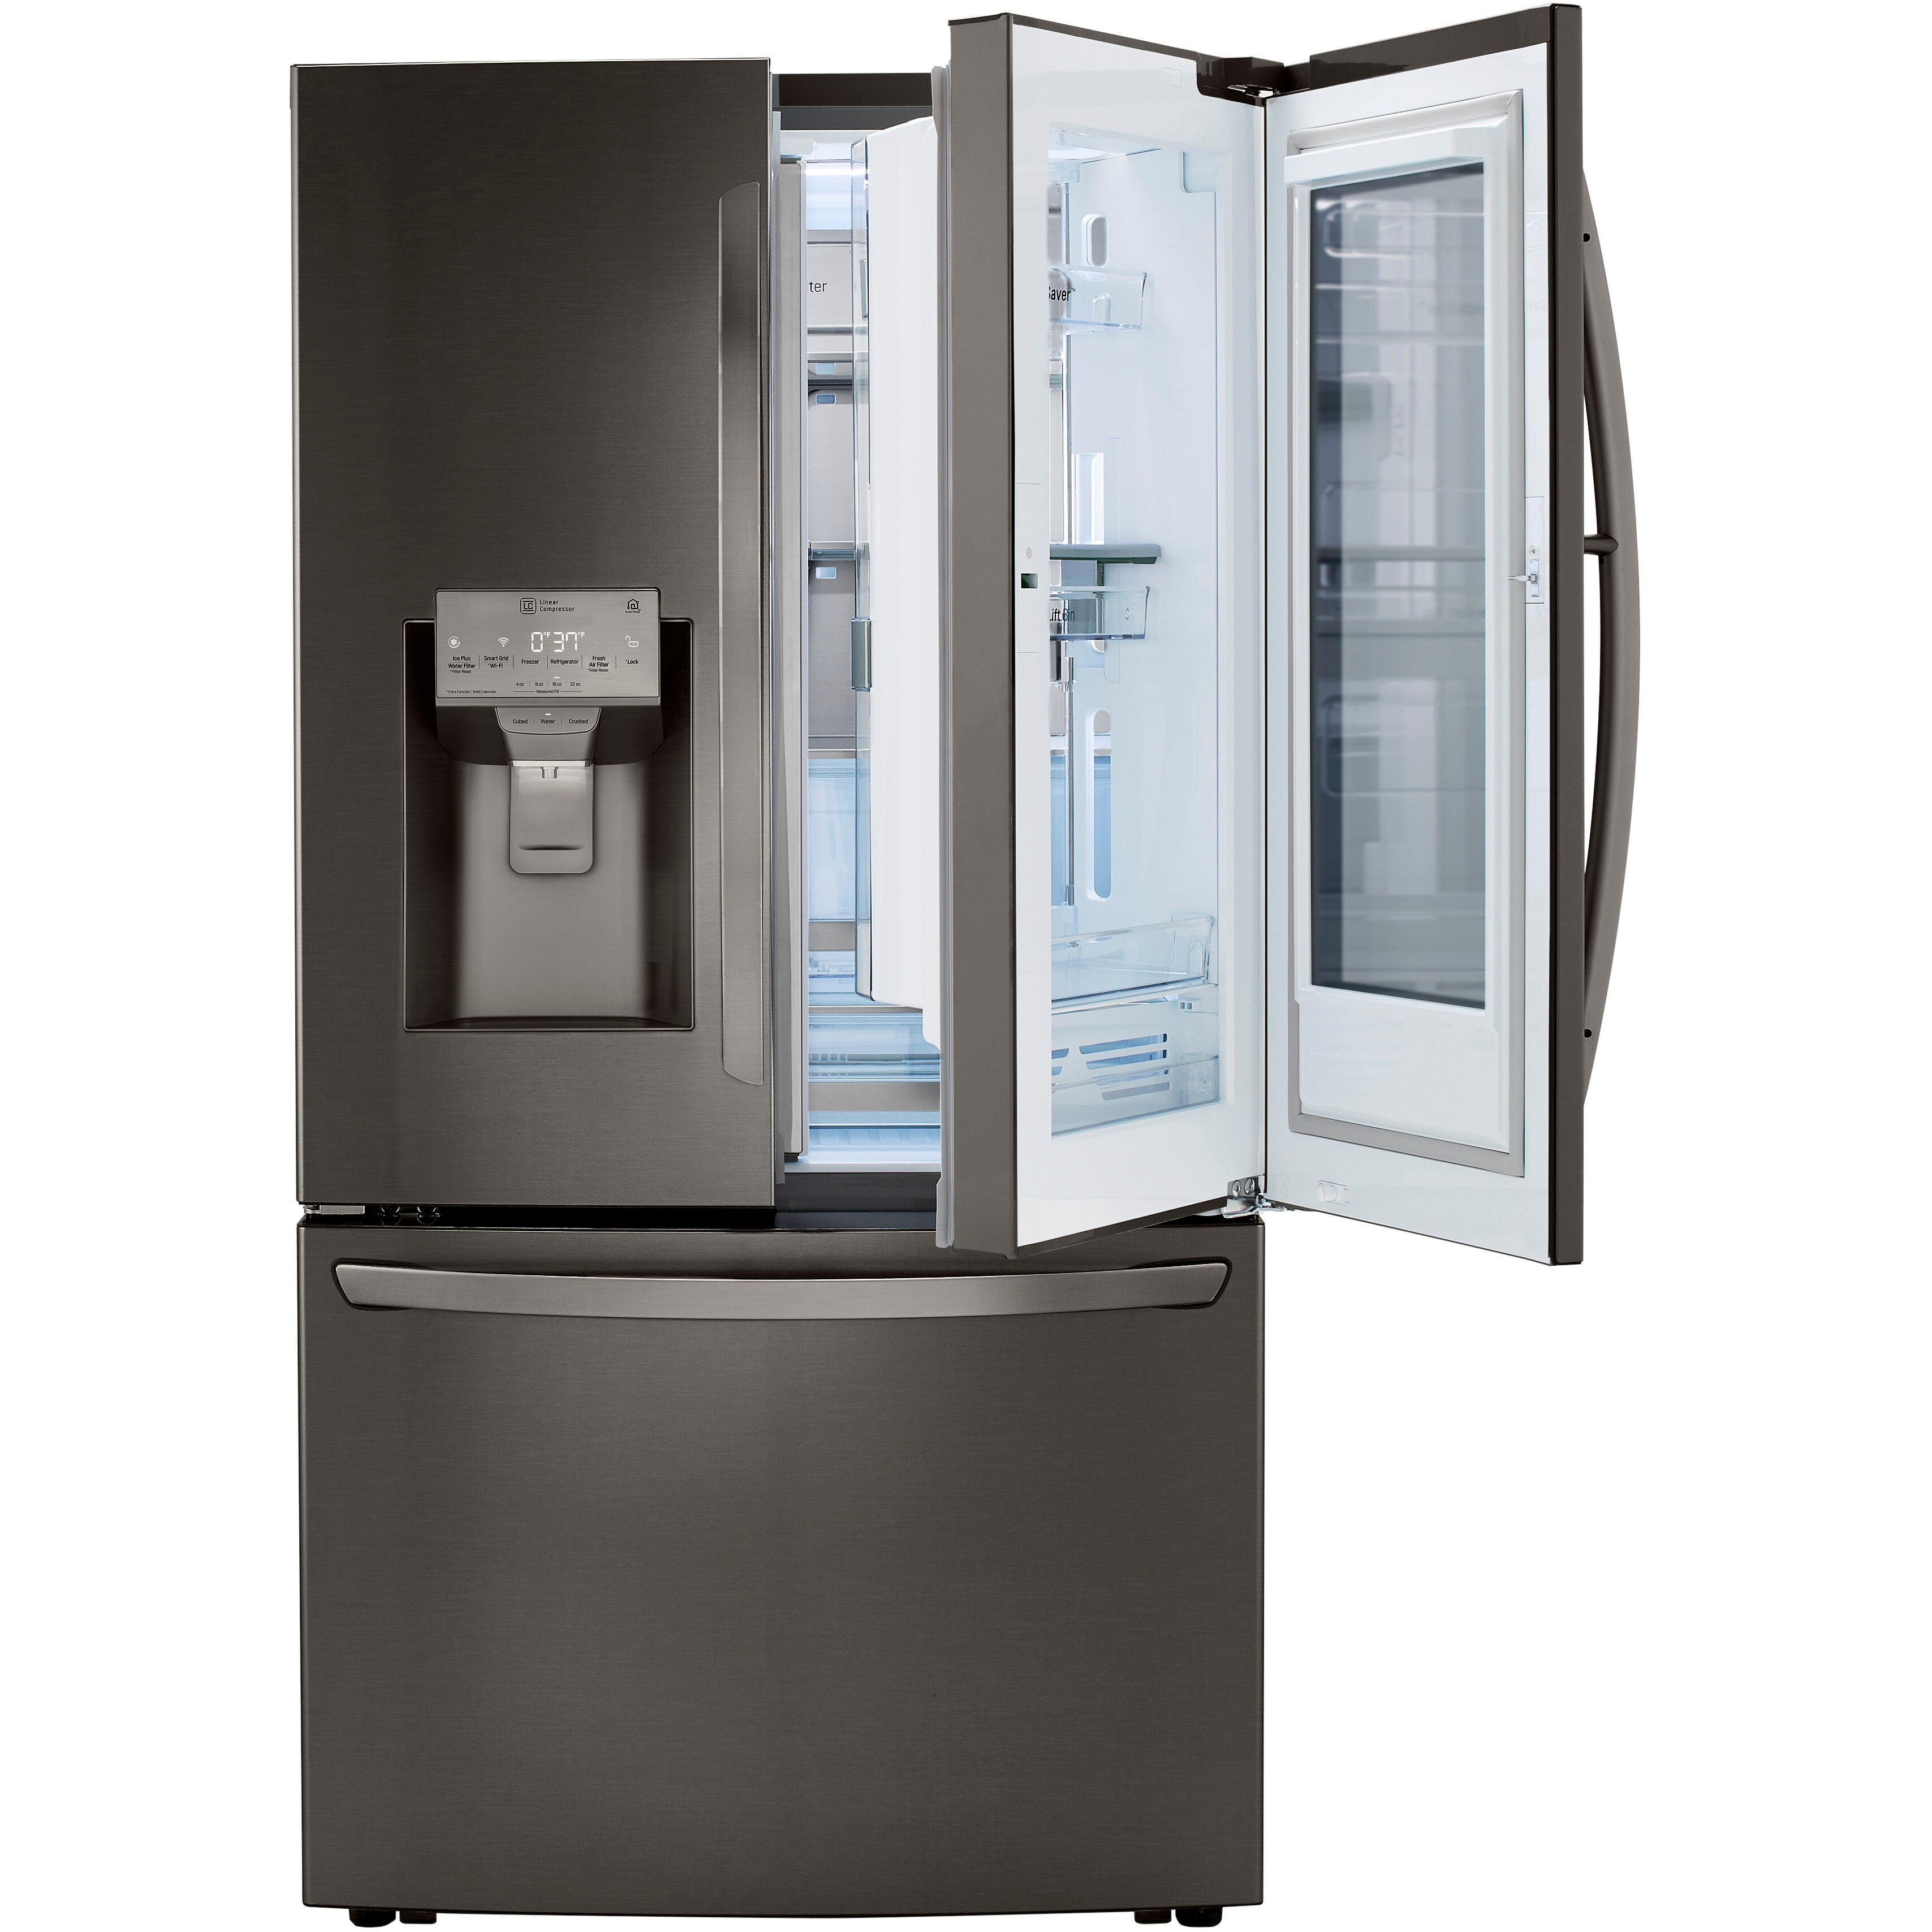 LG 36 Inch Counter-Depth French Door Refrigerator in Black Stainless Steel 24 Cu. Ft. (LRFVC2406D)